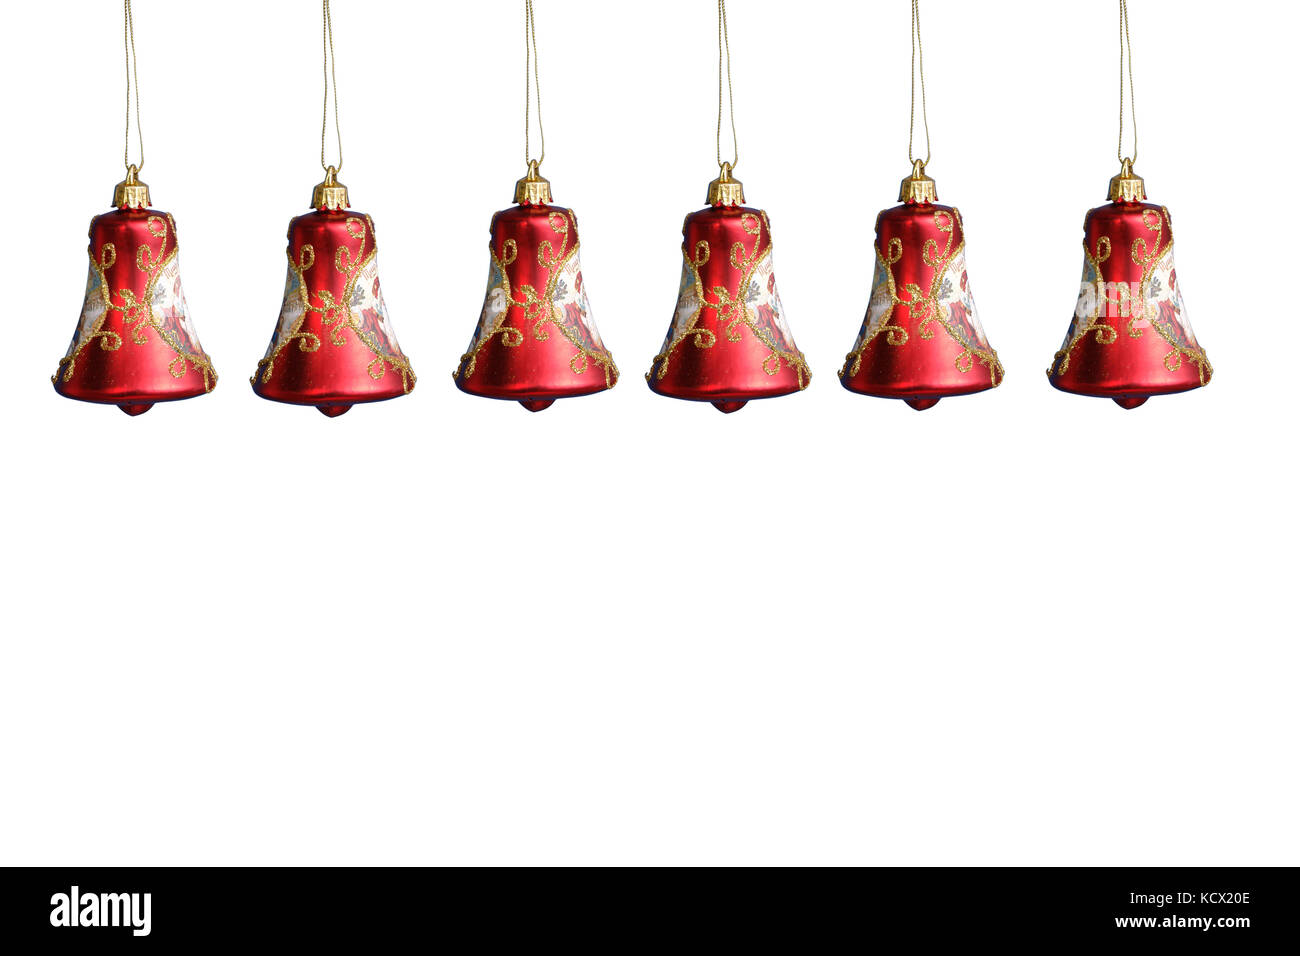 Row of red christmas bell decorations hanging on strings over white background Stock Photo